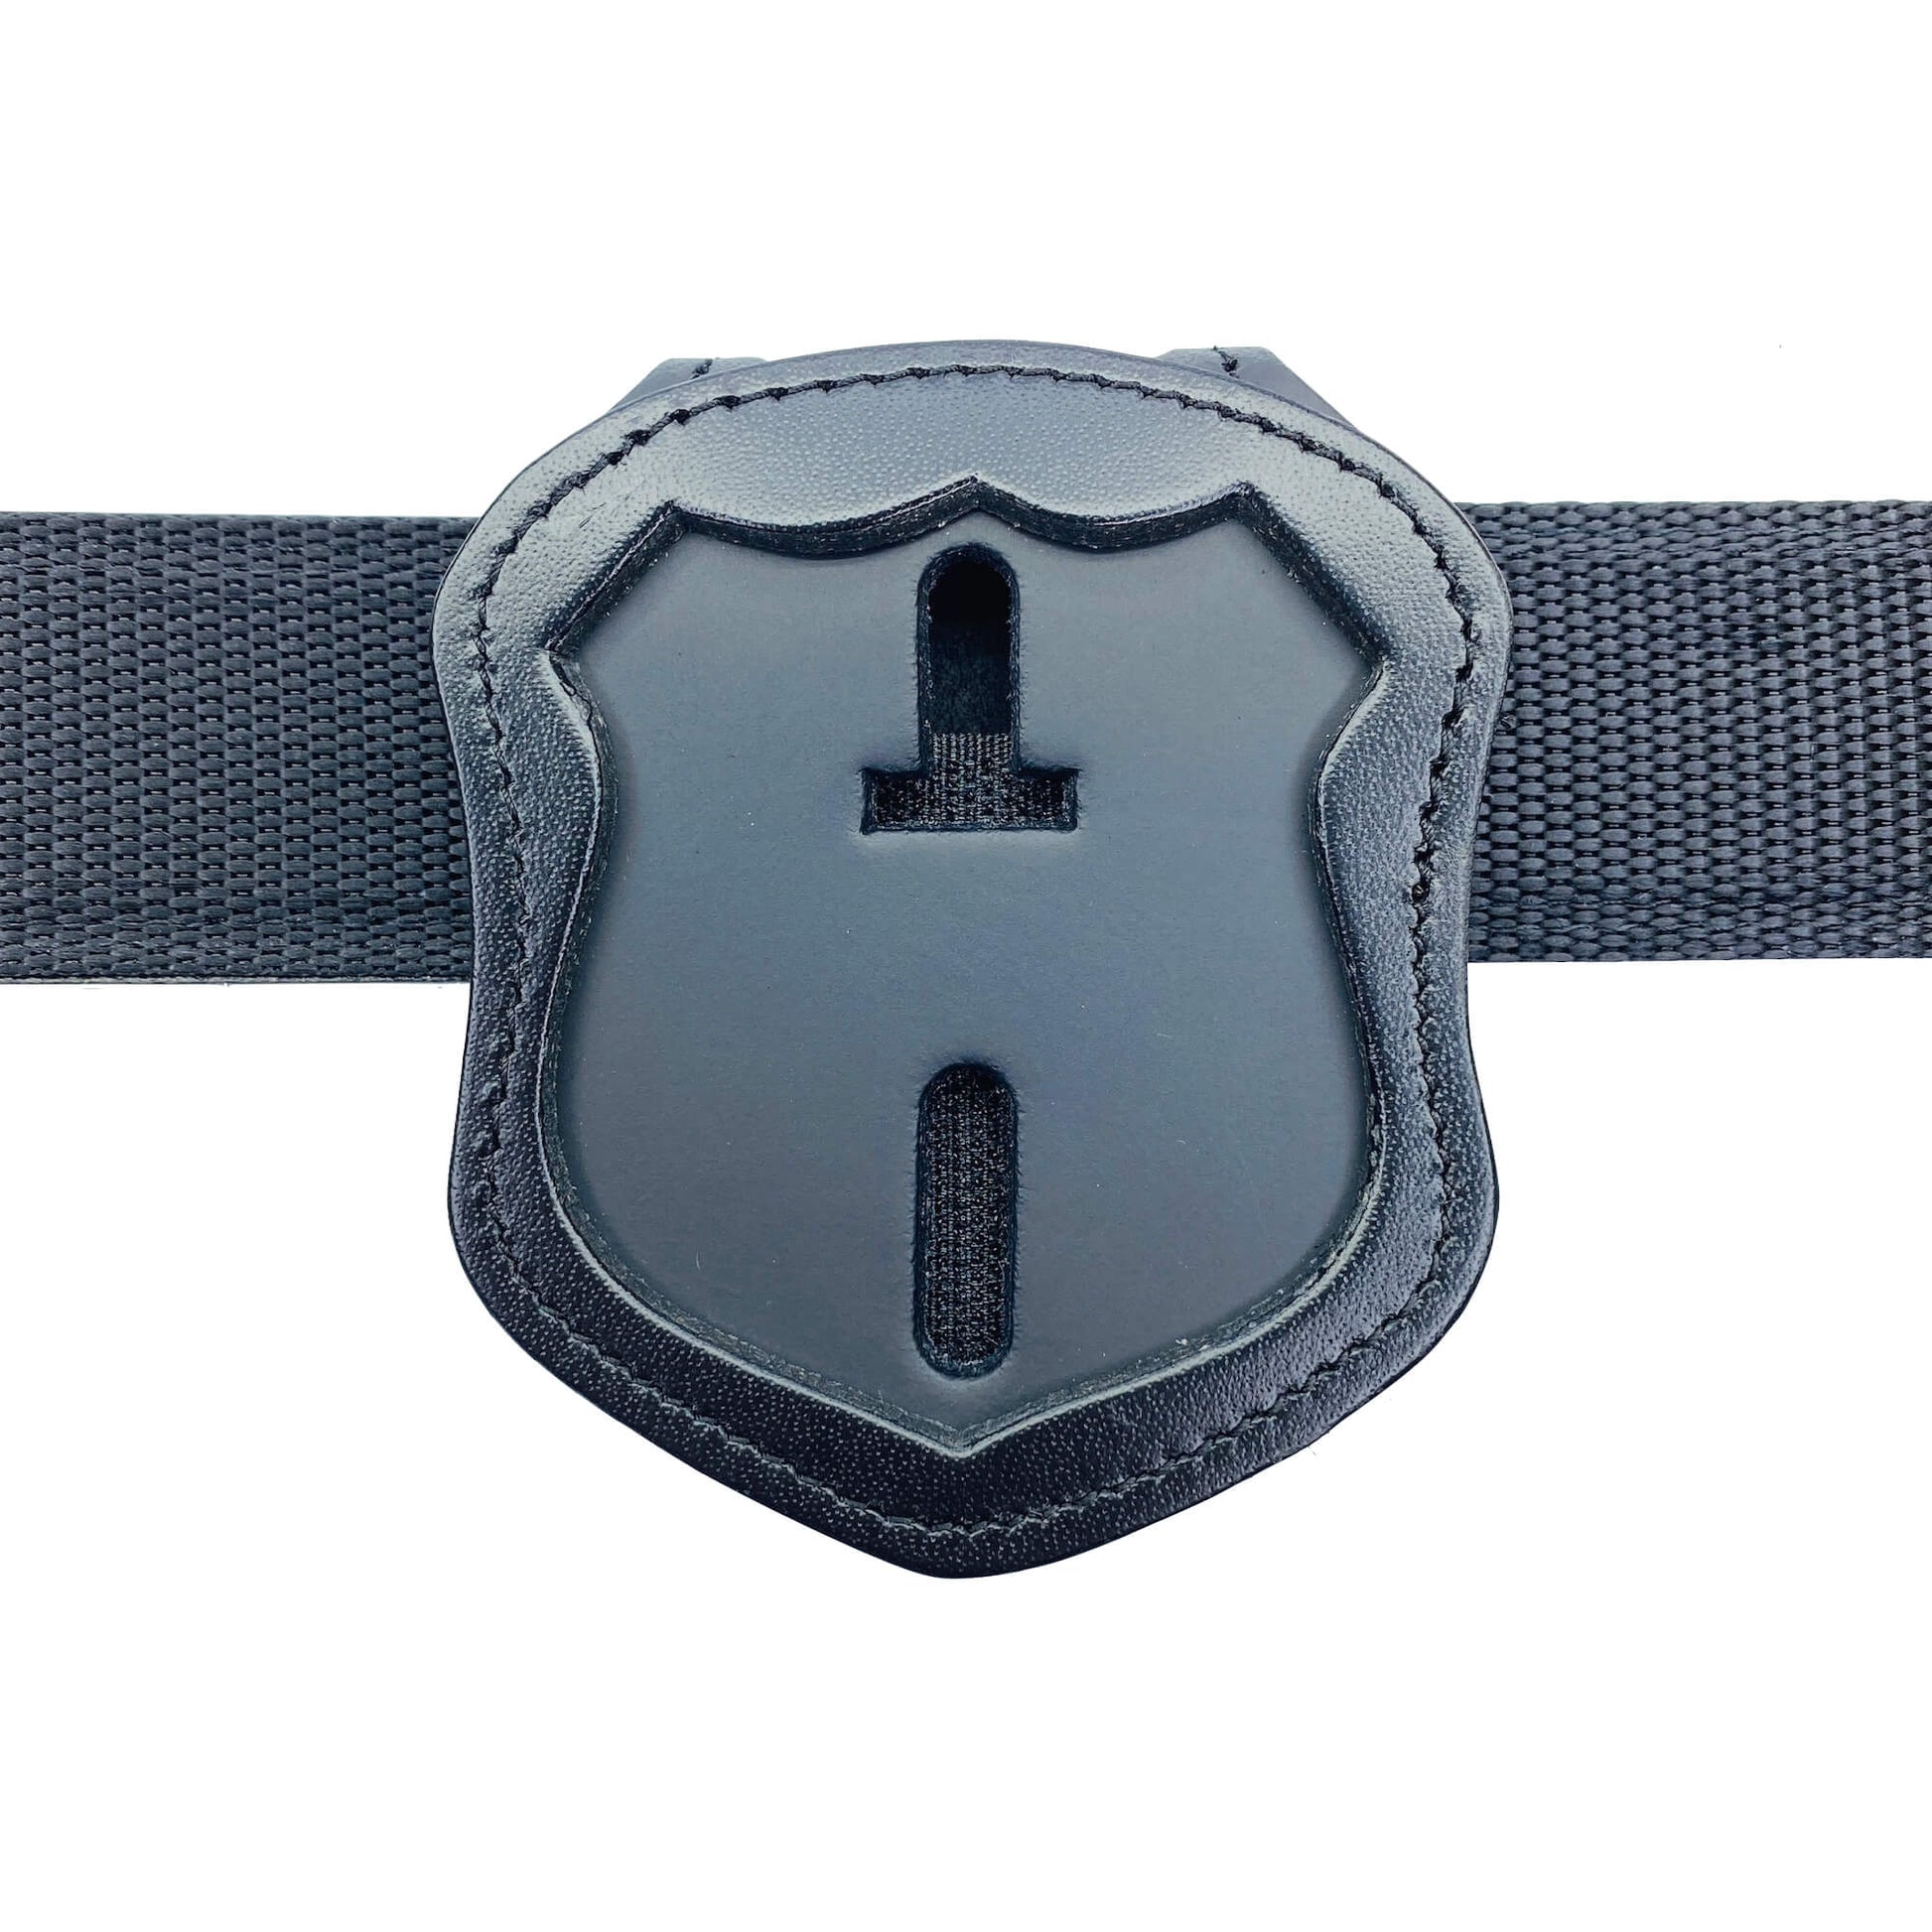 Recessed Belt Clip Badge holder with Pocket Chain & Imprint Style 716-PCI Canadian Federal Police -351